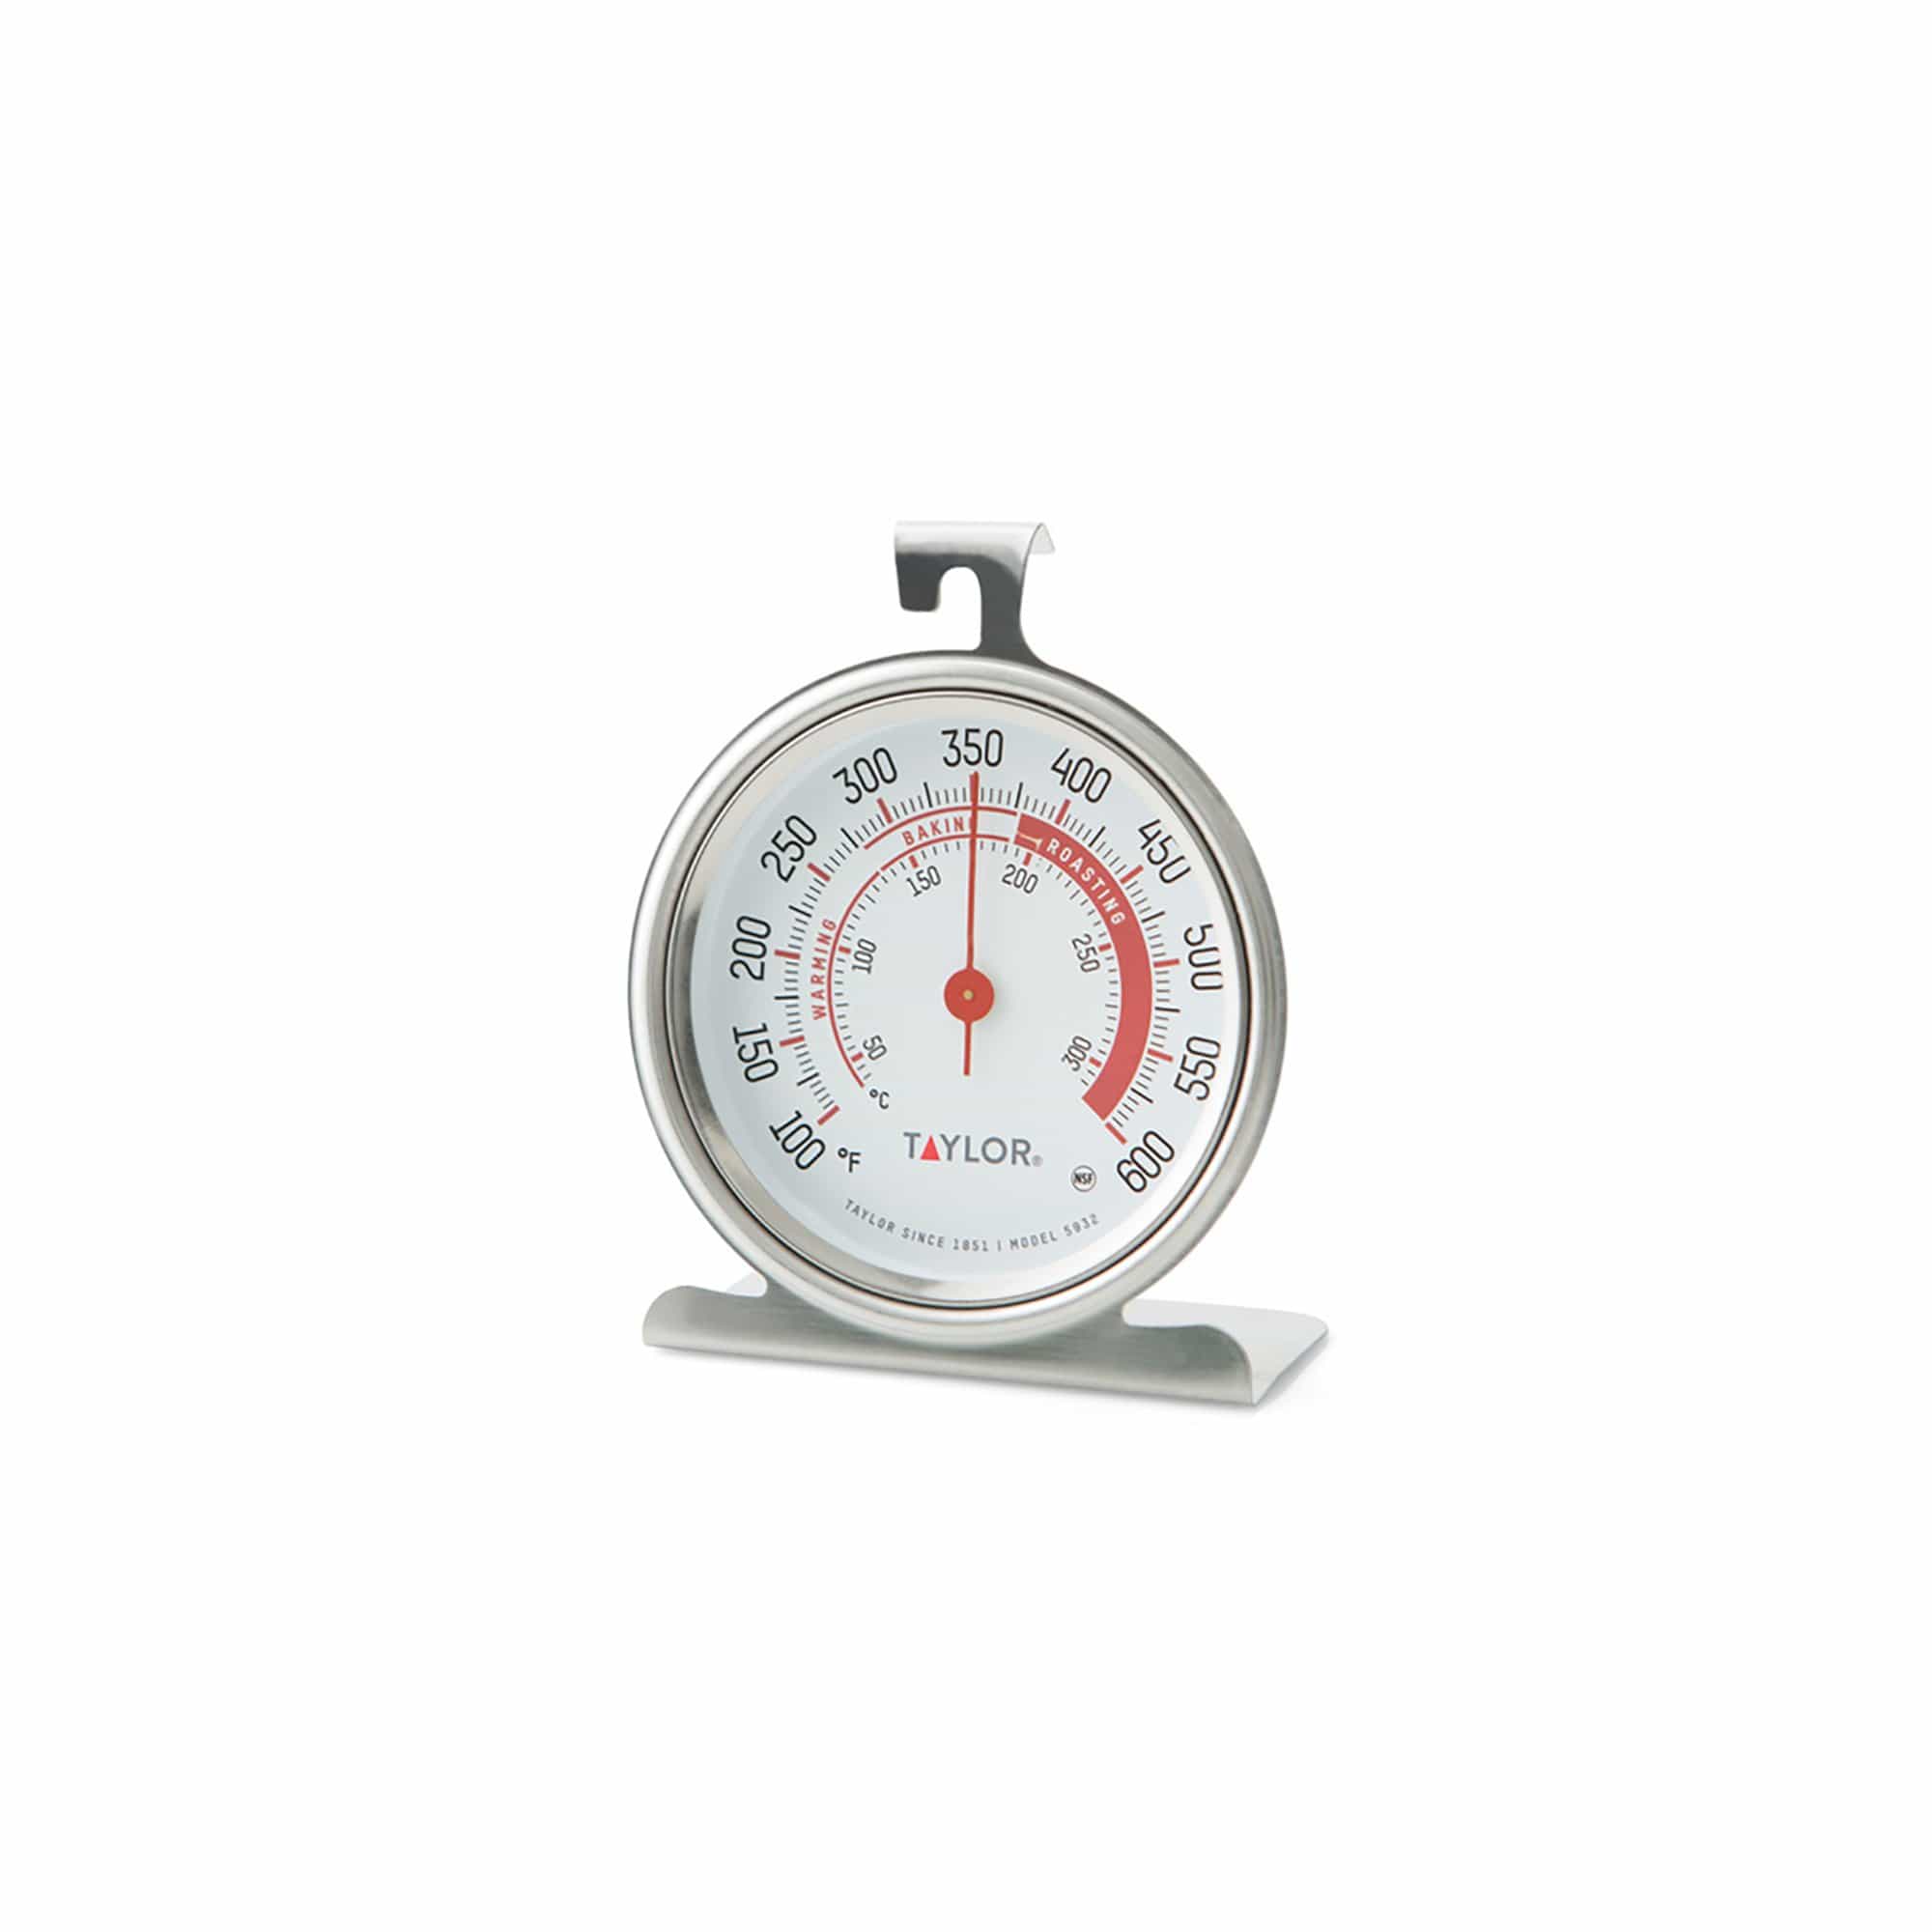 Taylor Large 2.5 Inch Dial Kitchen Cooking Oven Thermometer